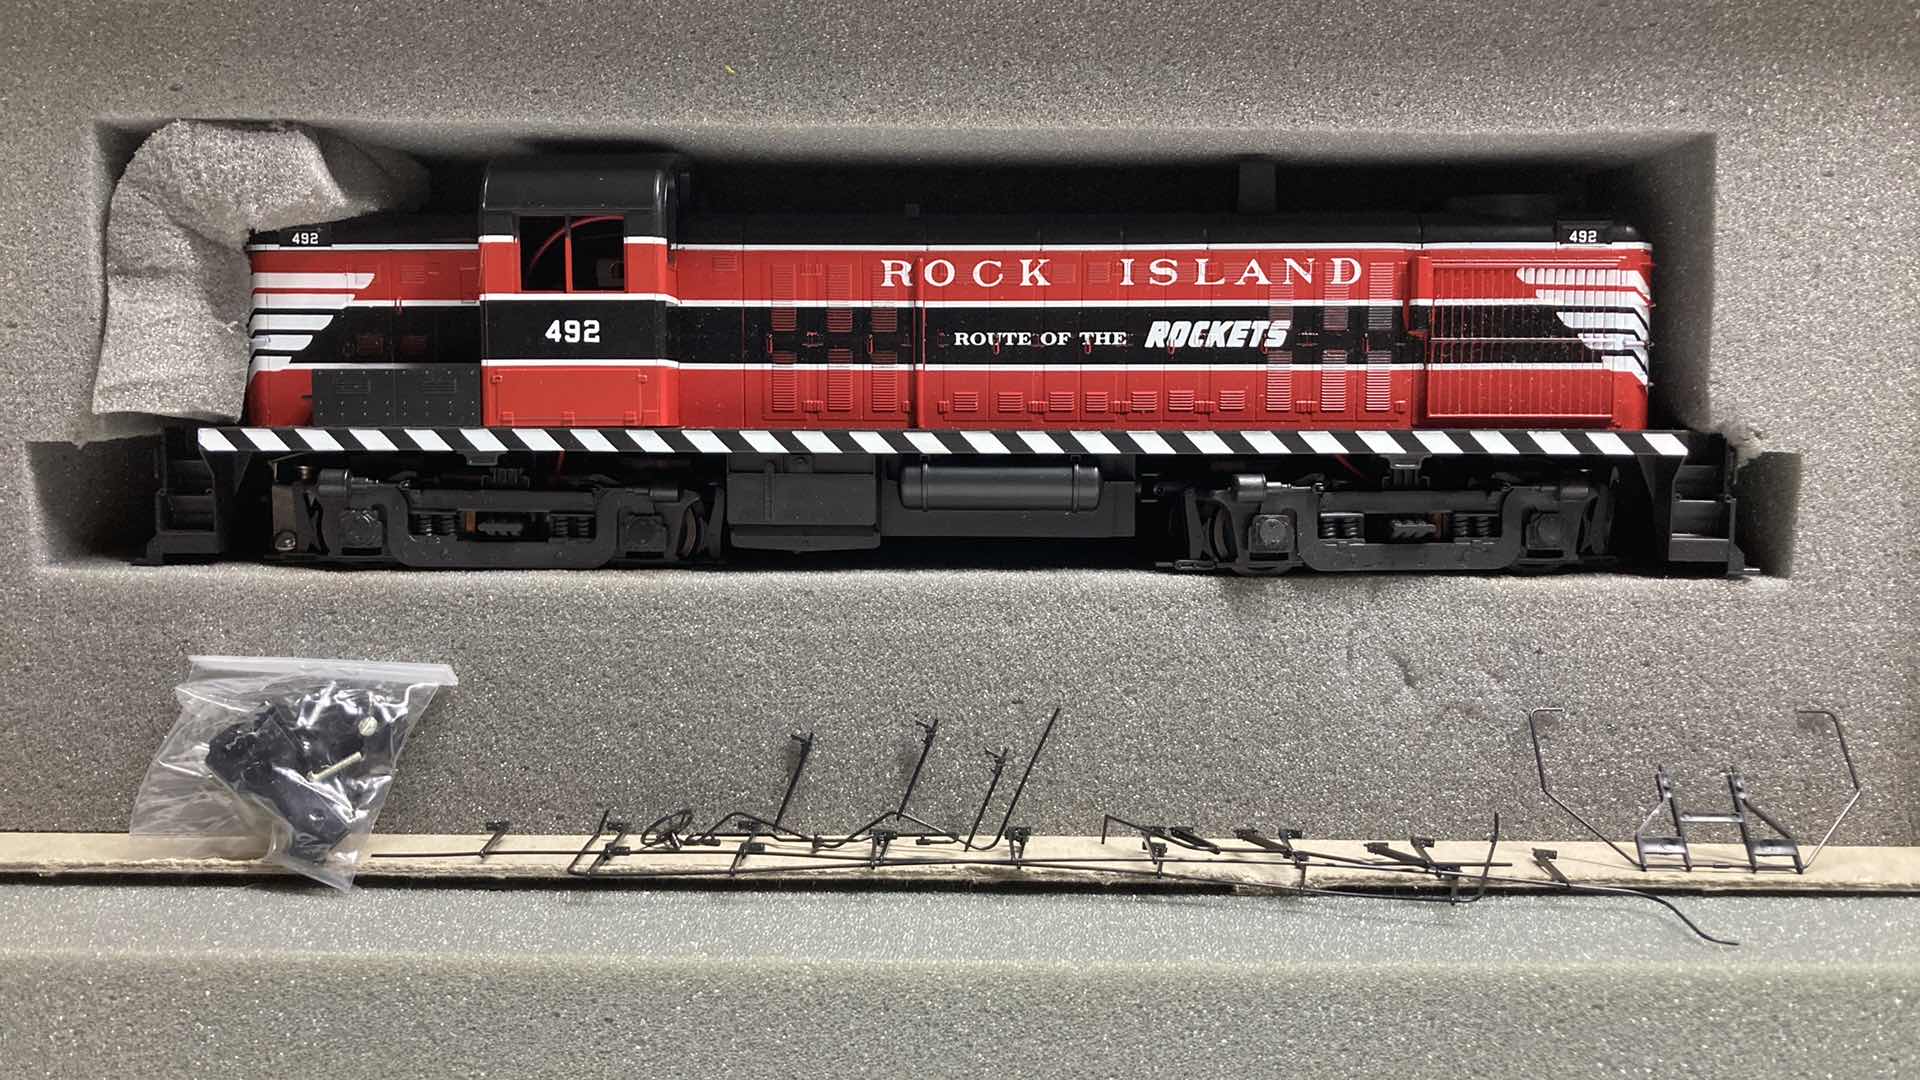 Photo 2 of RS3 ROCK ISLAND ROUTE OF THE ROCKETS 492 ELECTRIC LOCOMOTIVE